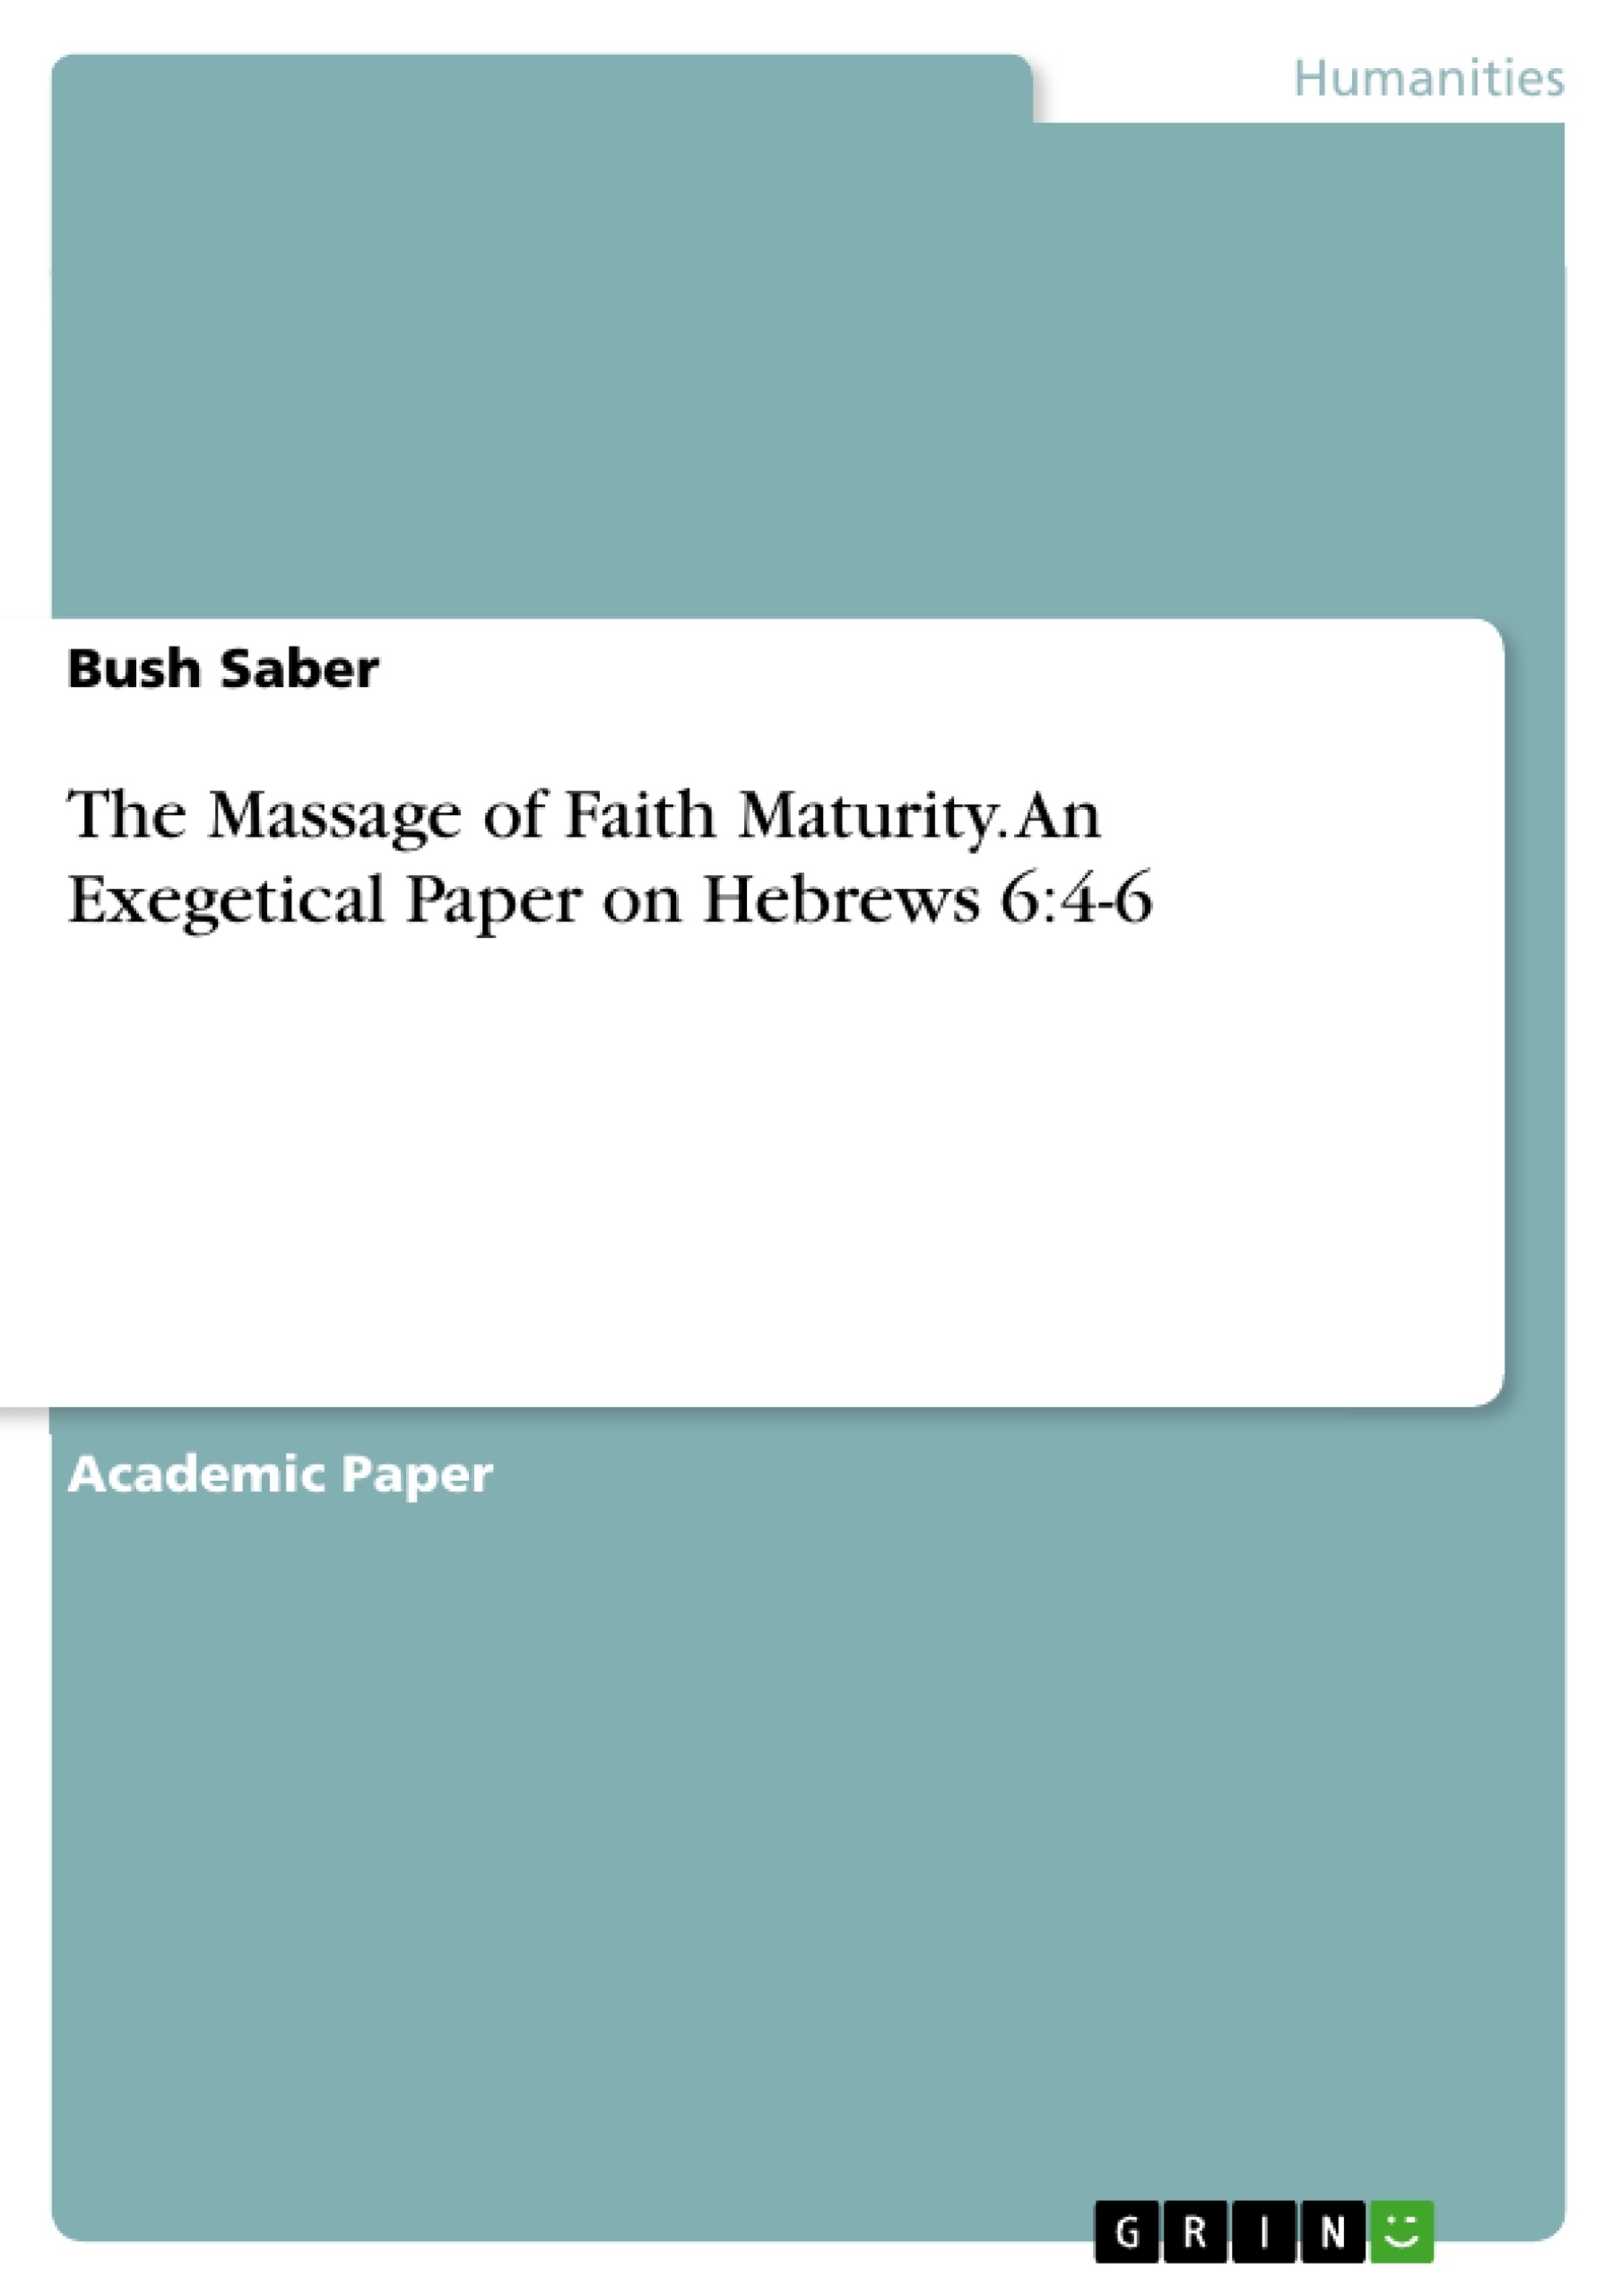 Título: The Massage of Faith Maturity. An Exegetical Paper on Hebrews 6:4-6